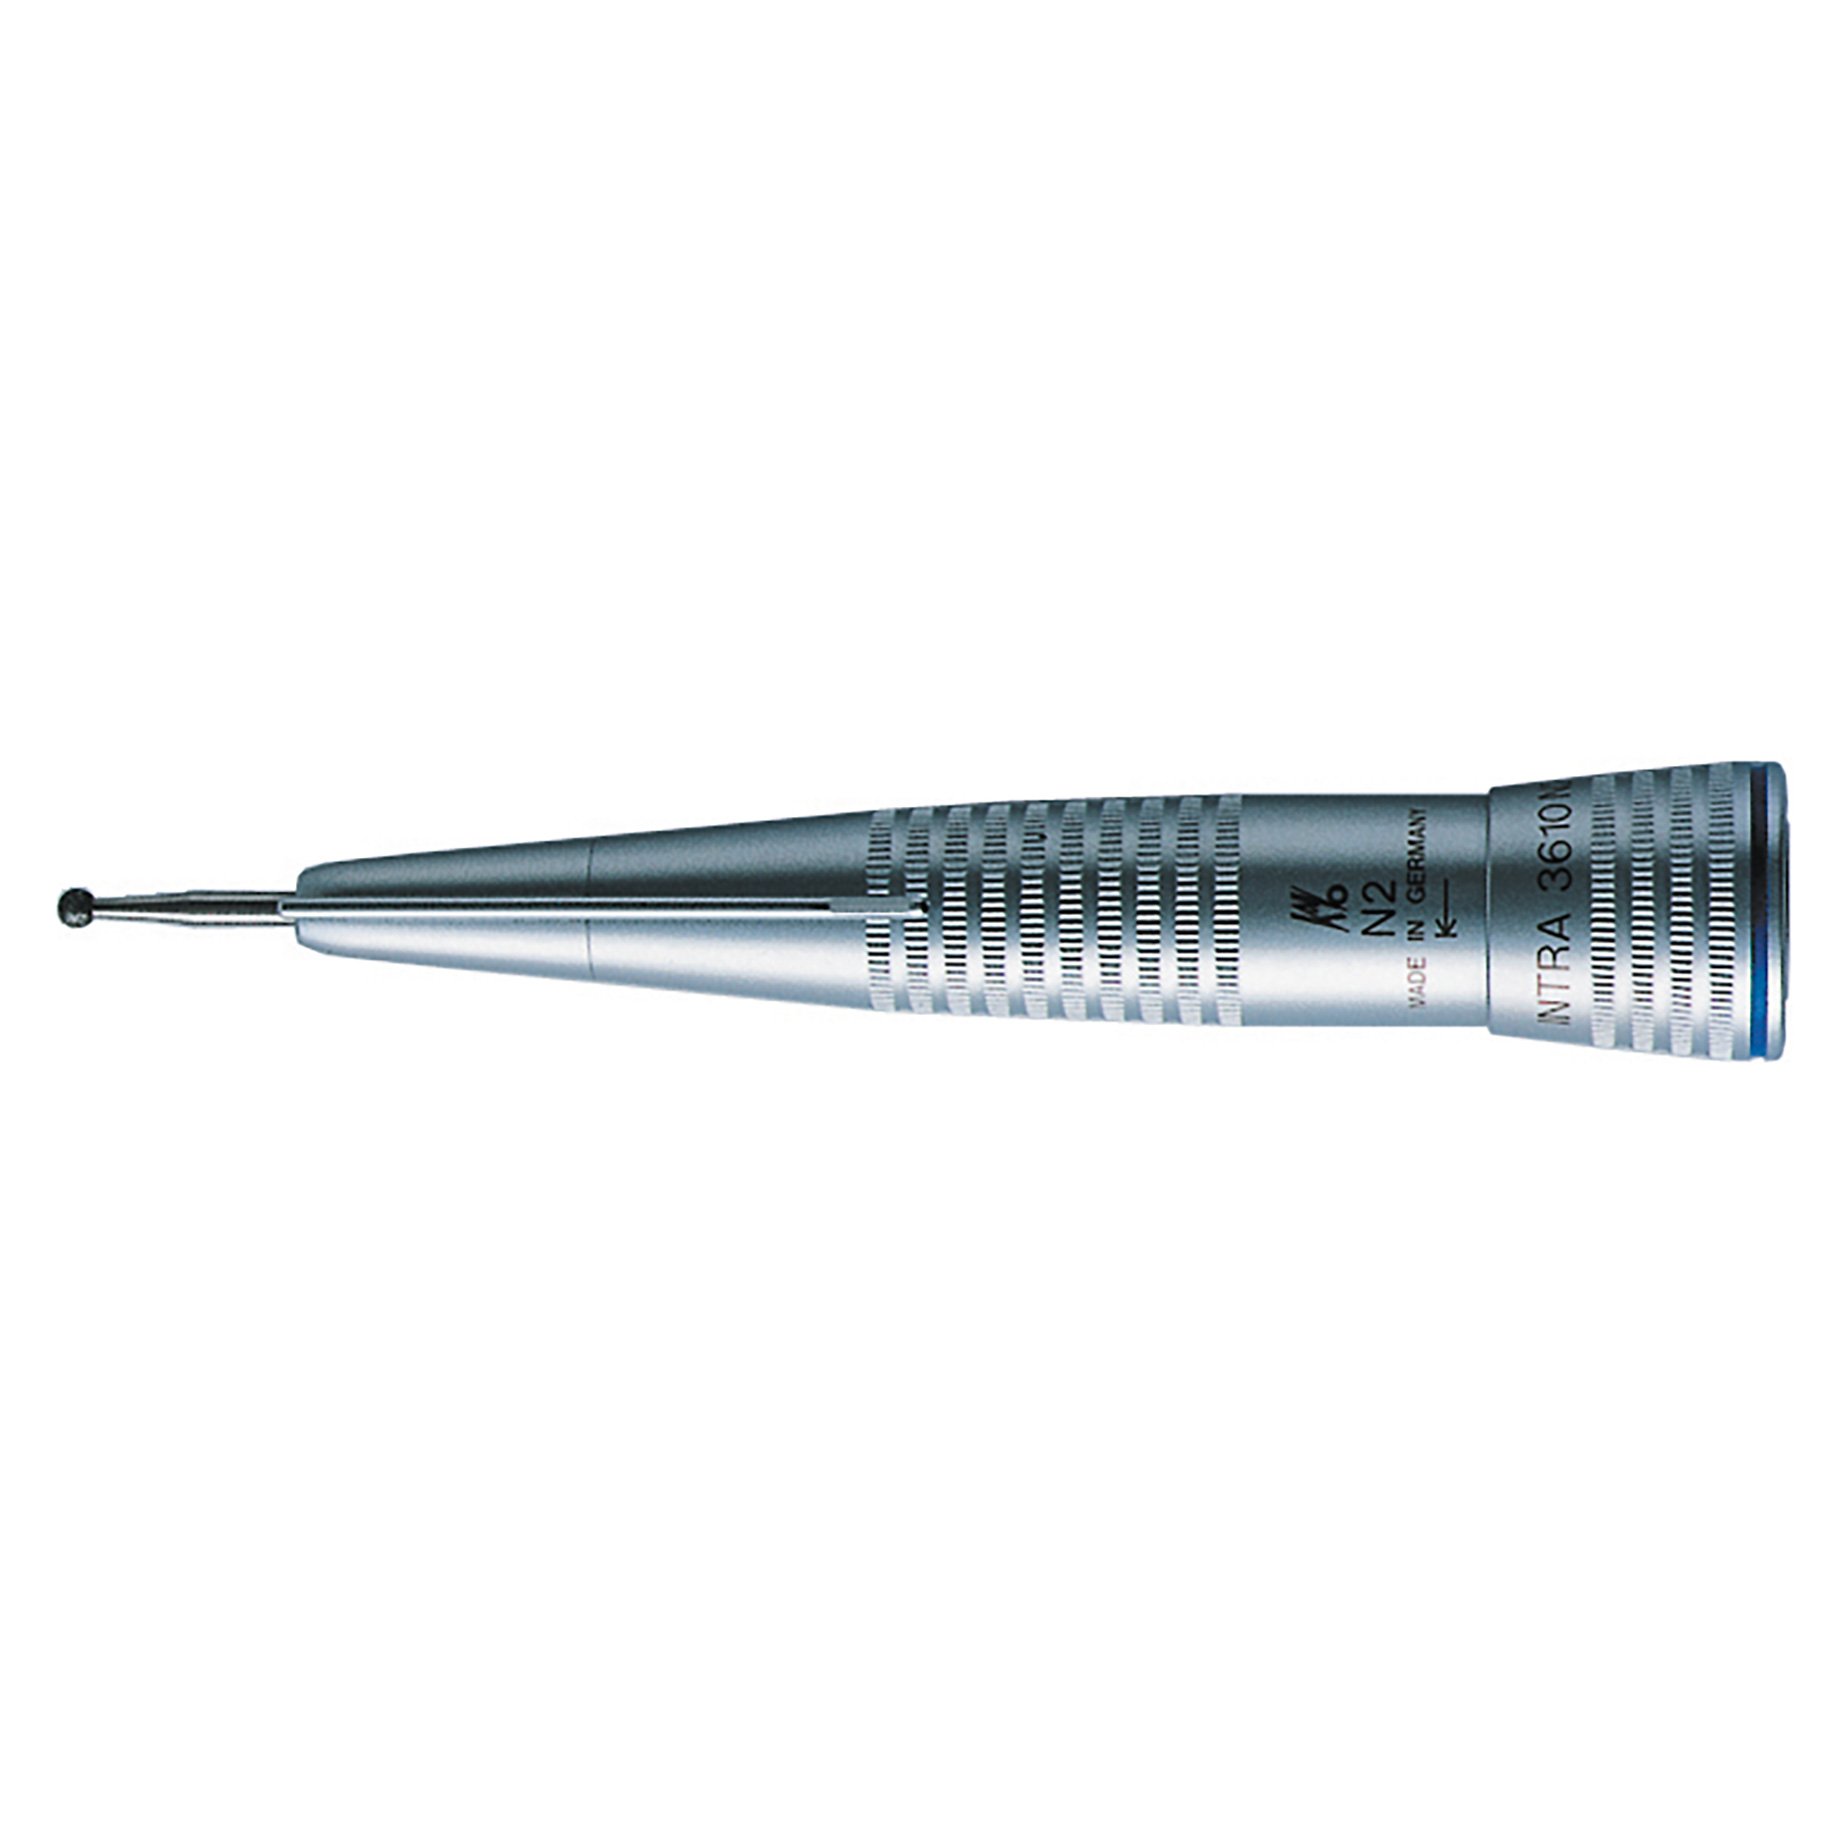 KaVo INTRA Surgical Handpiece 3610 N2 